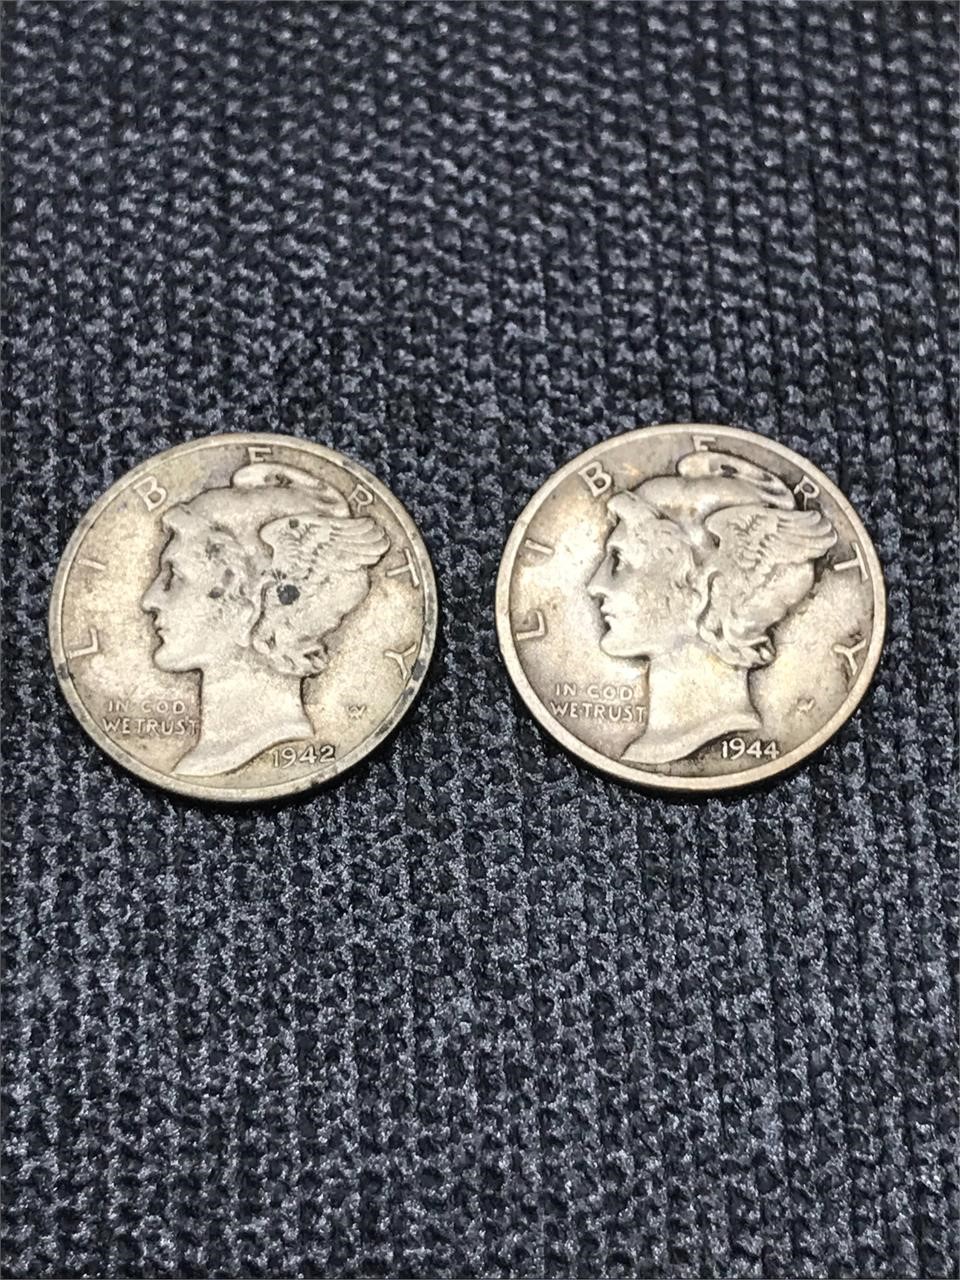 Lot of 2 Mercury Dimes 1944 and 1942